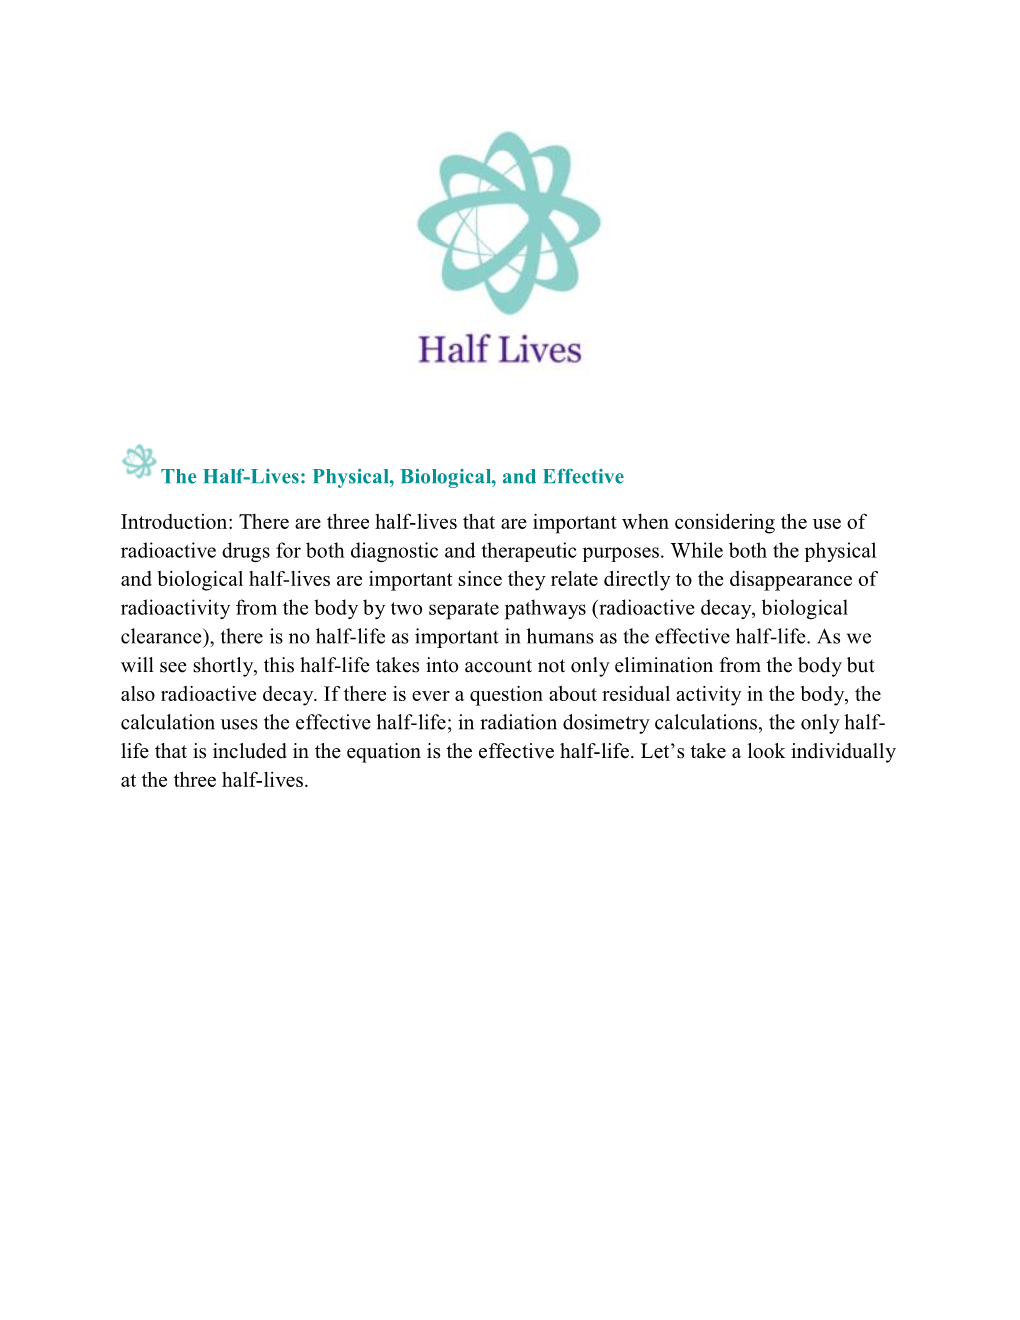 The Half-Lives: Physical, Biological, and Effective